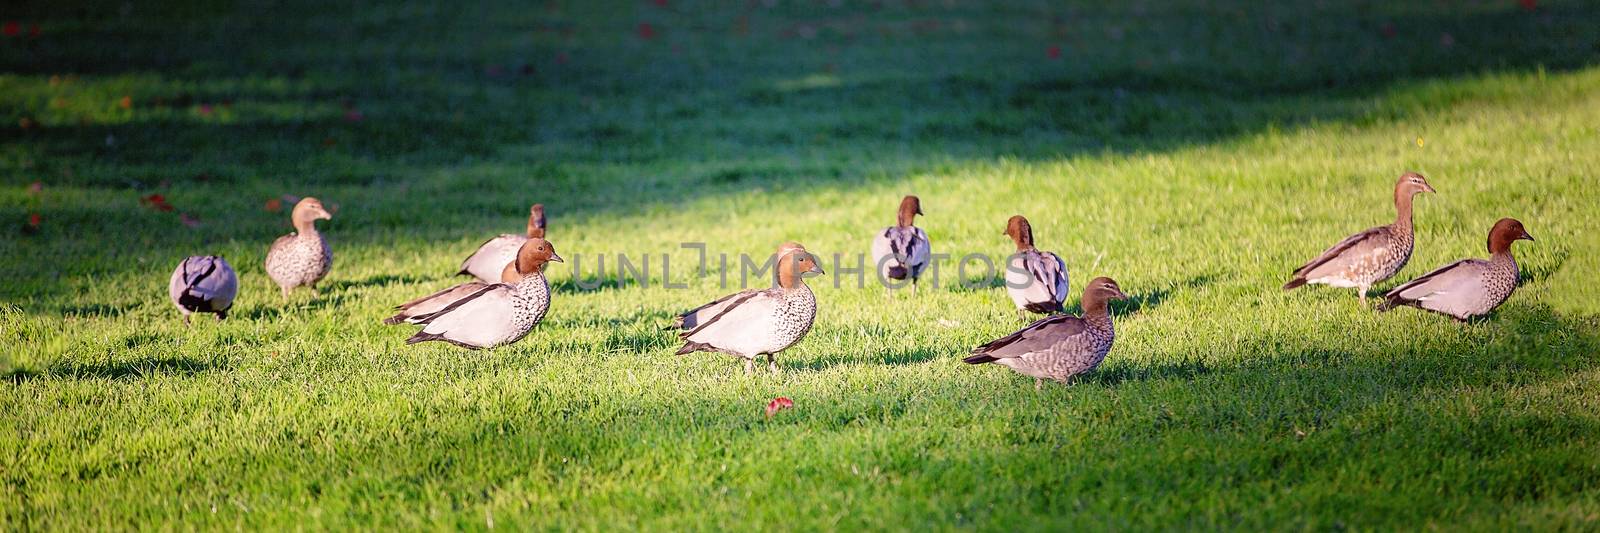 Birds On Lawn At Sunrise by 	JacksonStock